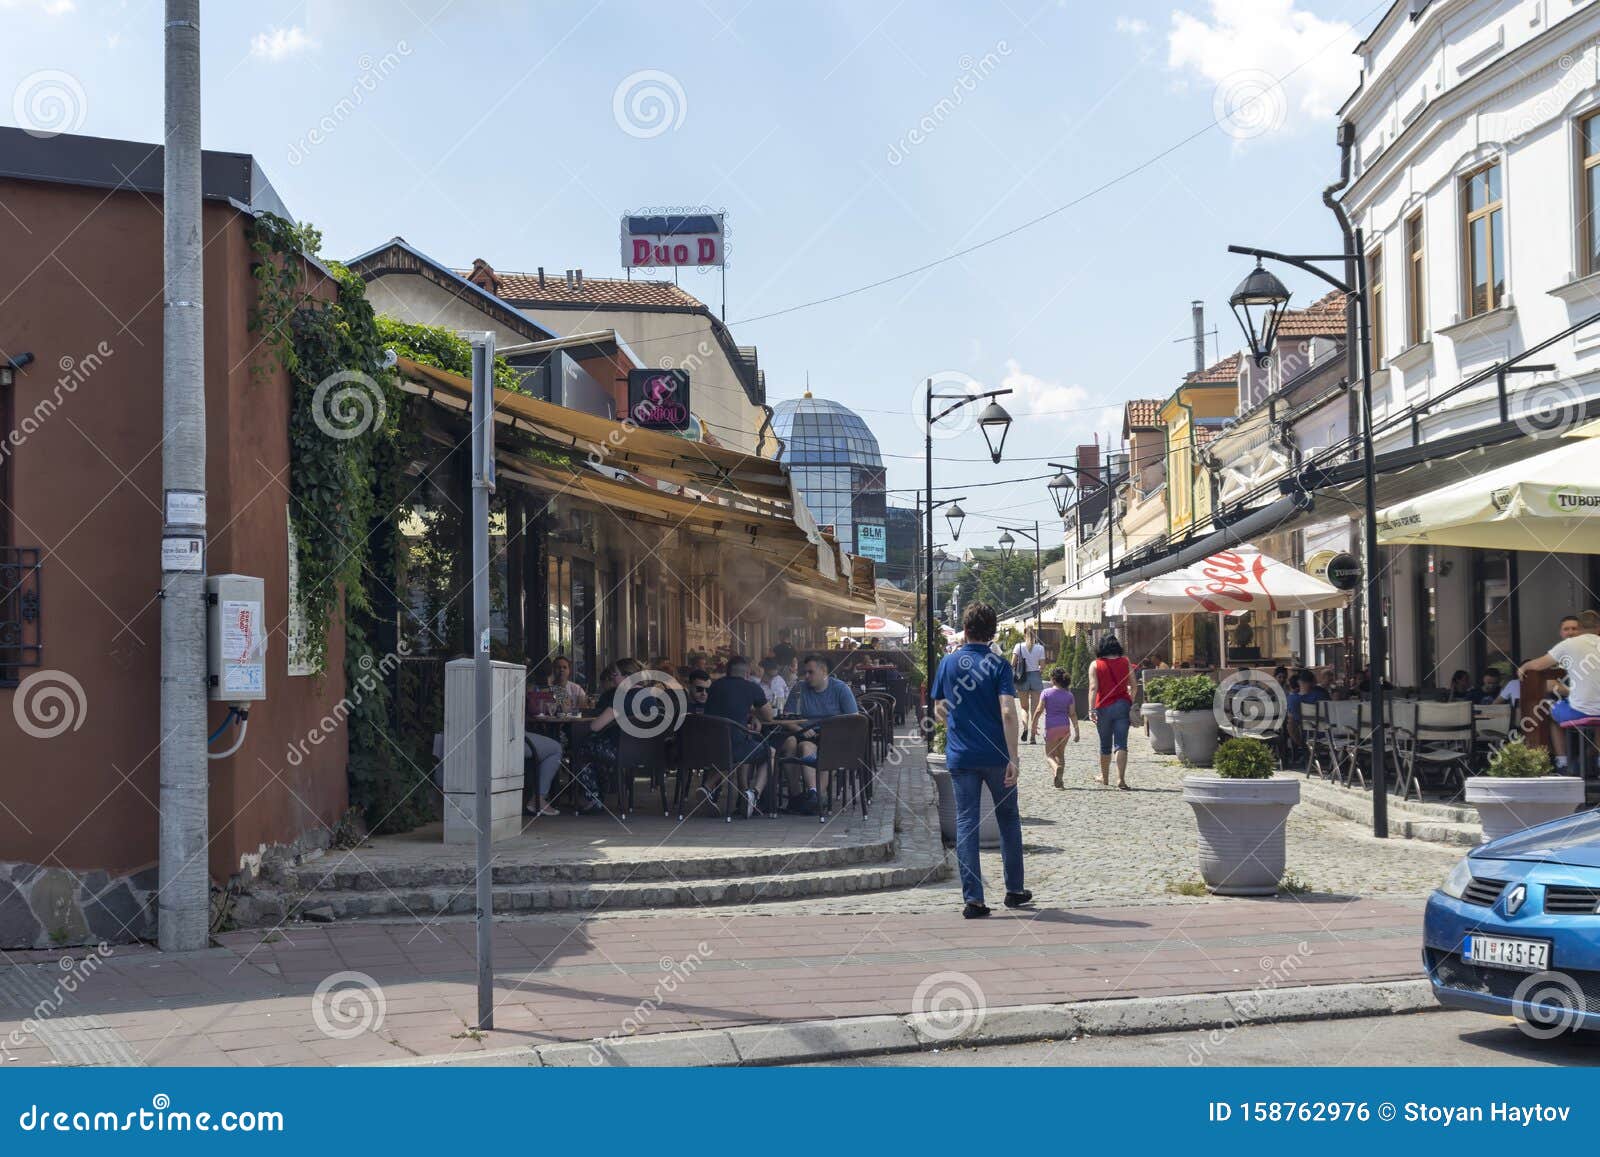 Tinkers Alley at the Center of City of Nis, Serbia Editorial Photo ...